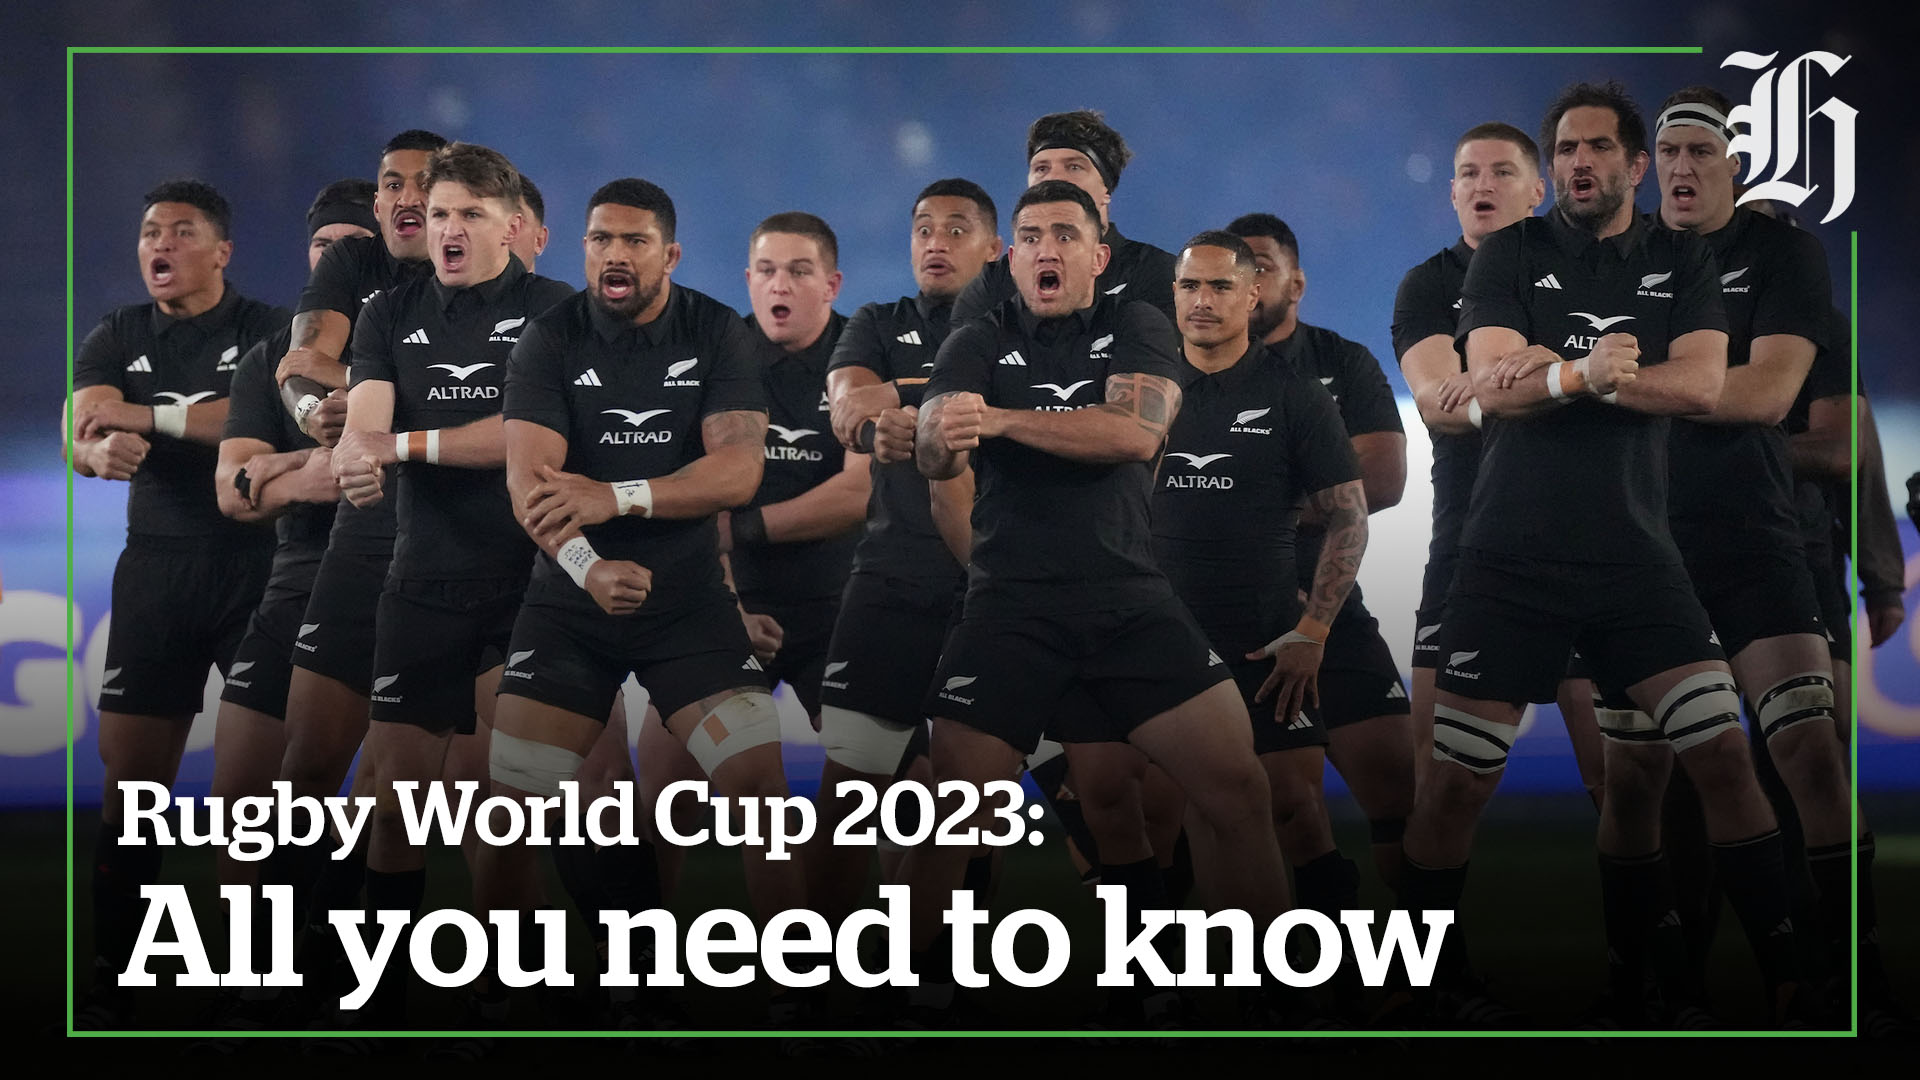 Who will win the 2023 Rugby World Cup? This algorithm uses 10,000  simulations to rank the contenders